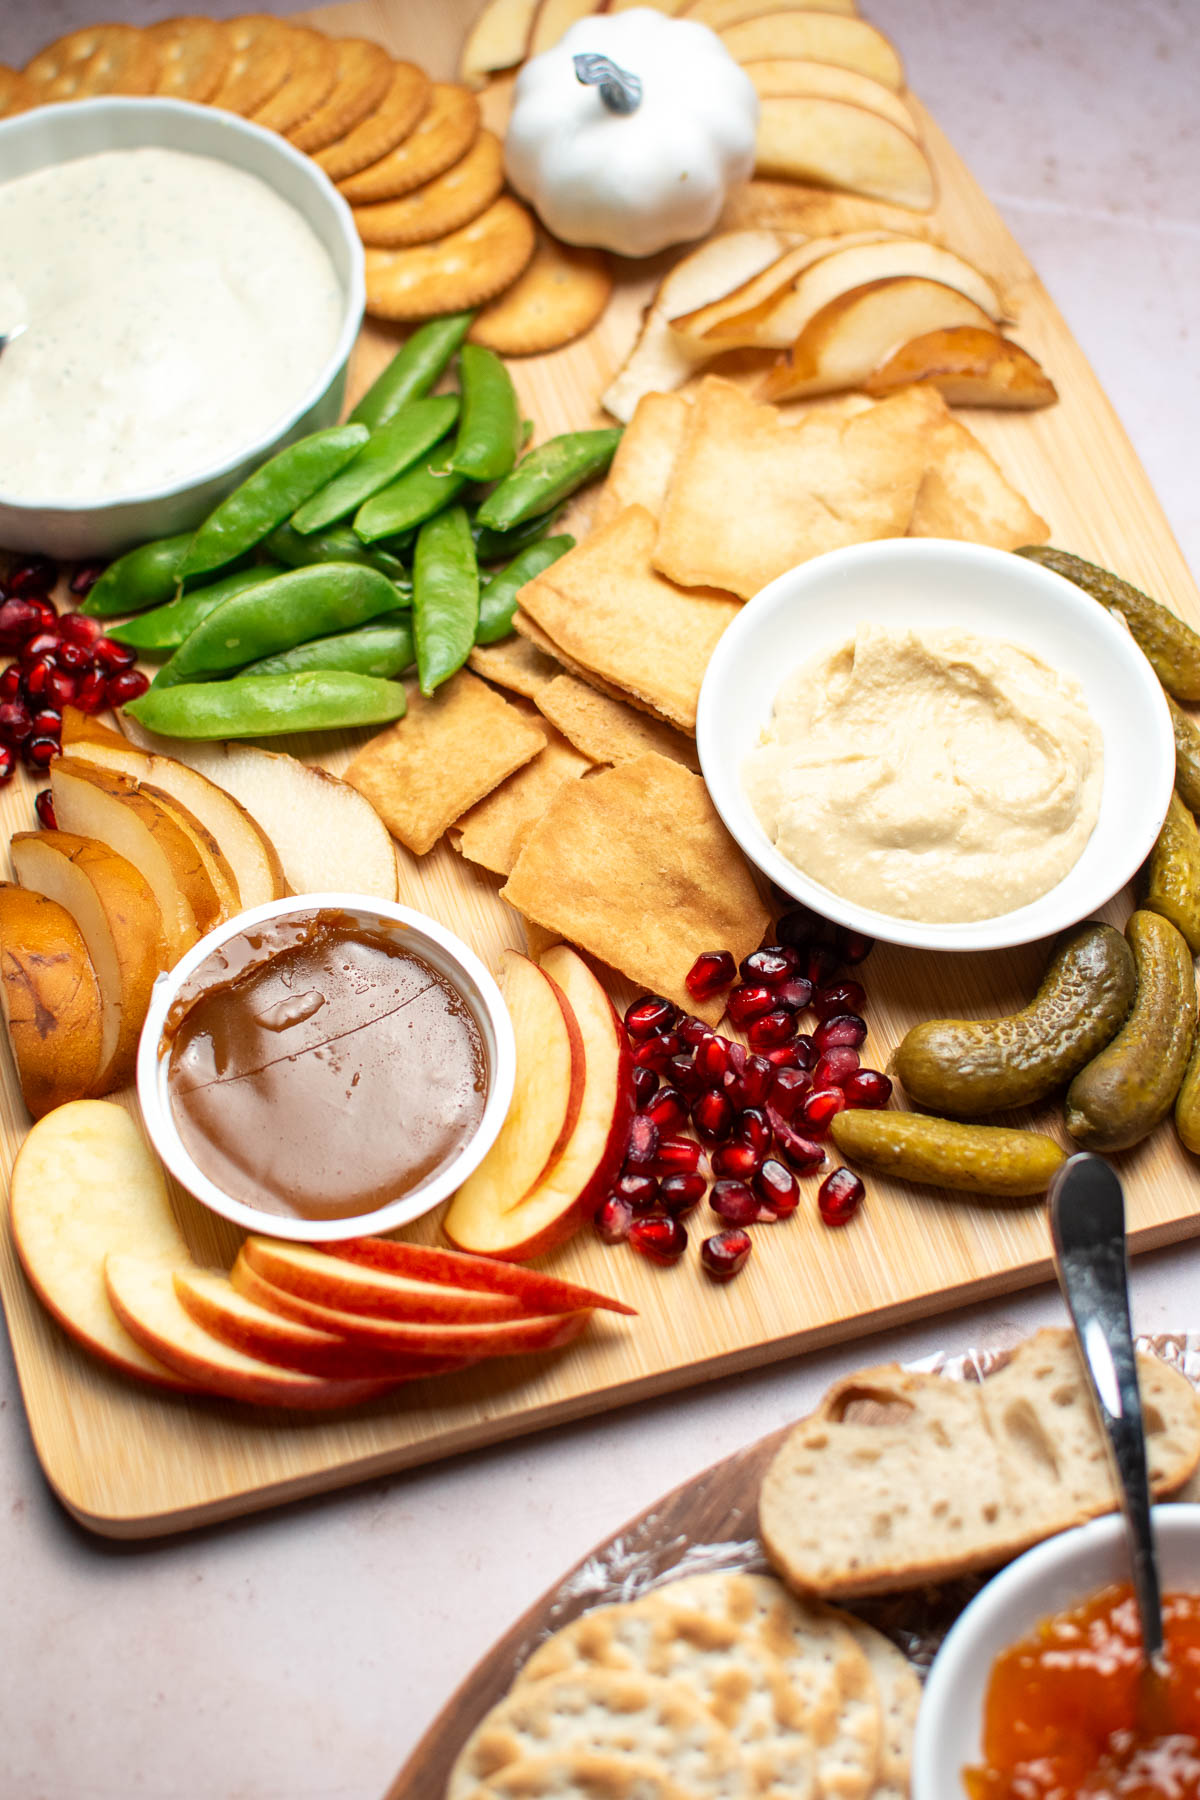 Three bowls of dip and various fruits, vegetables, and crackers on wooden cutting board.